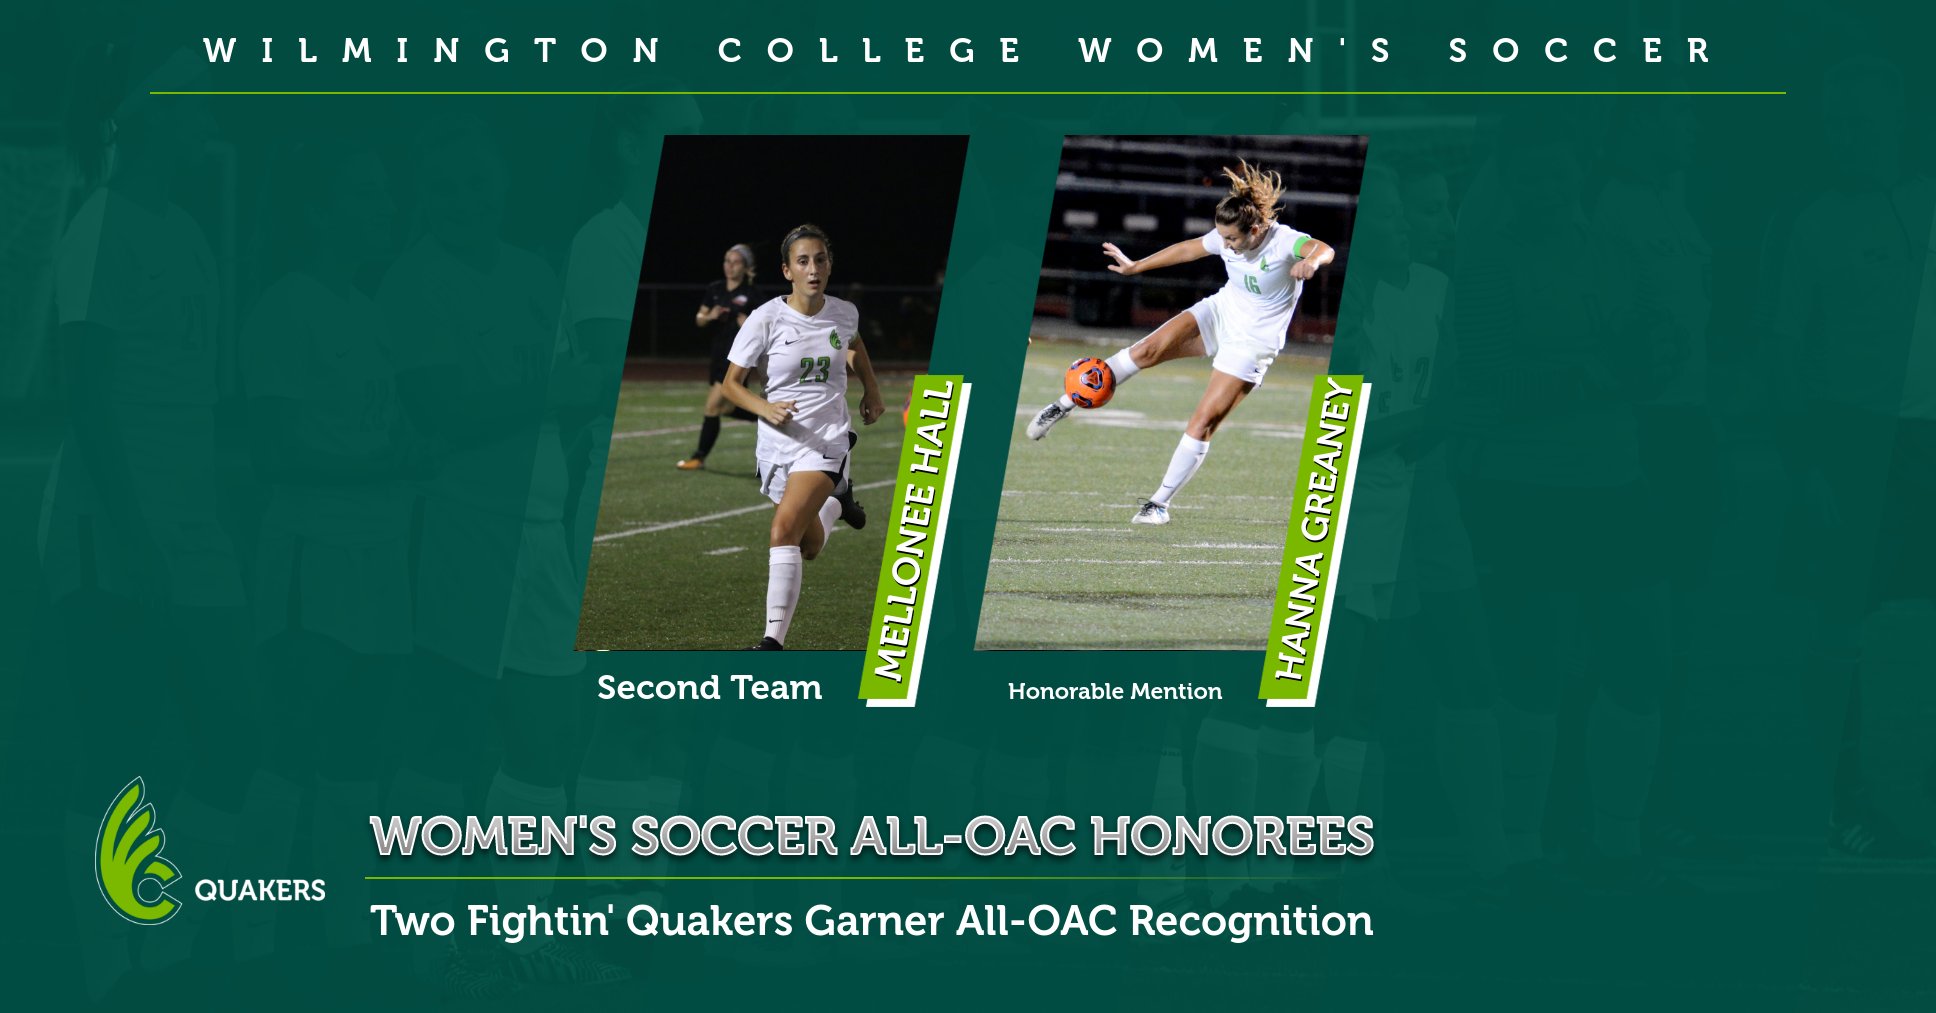 Hall and Greaney Earn All-OAC Honors for Women's Soccer